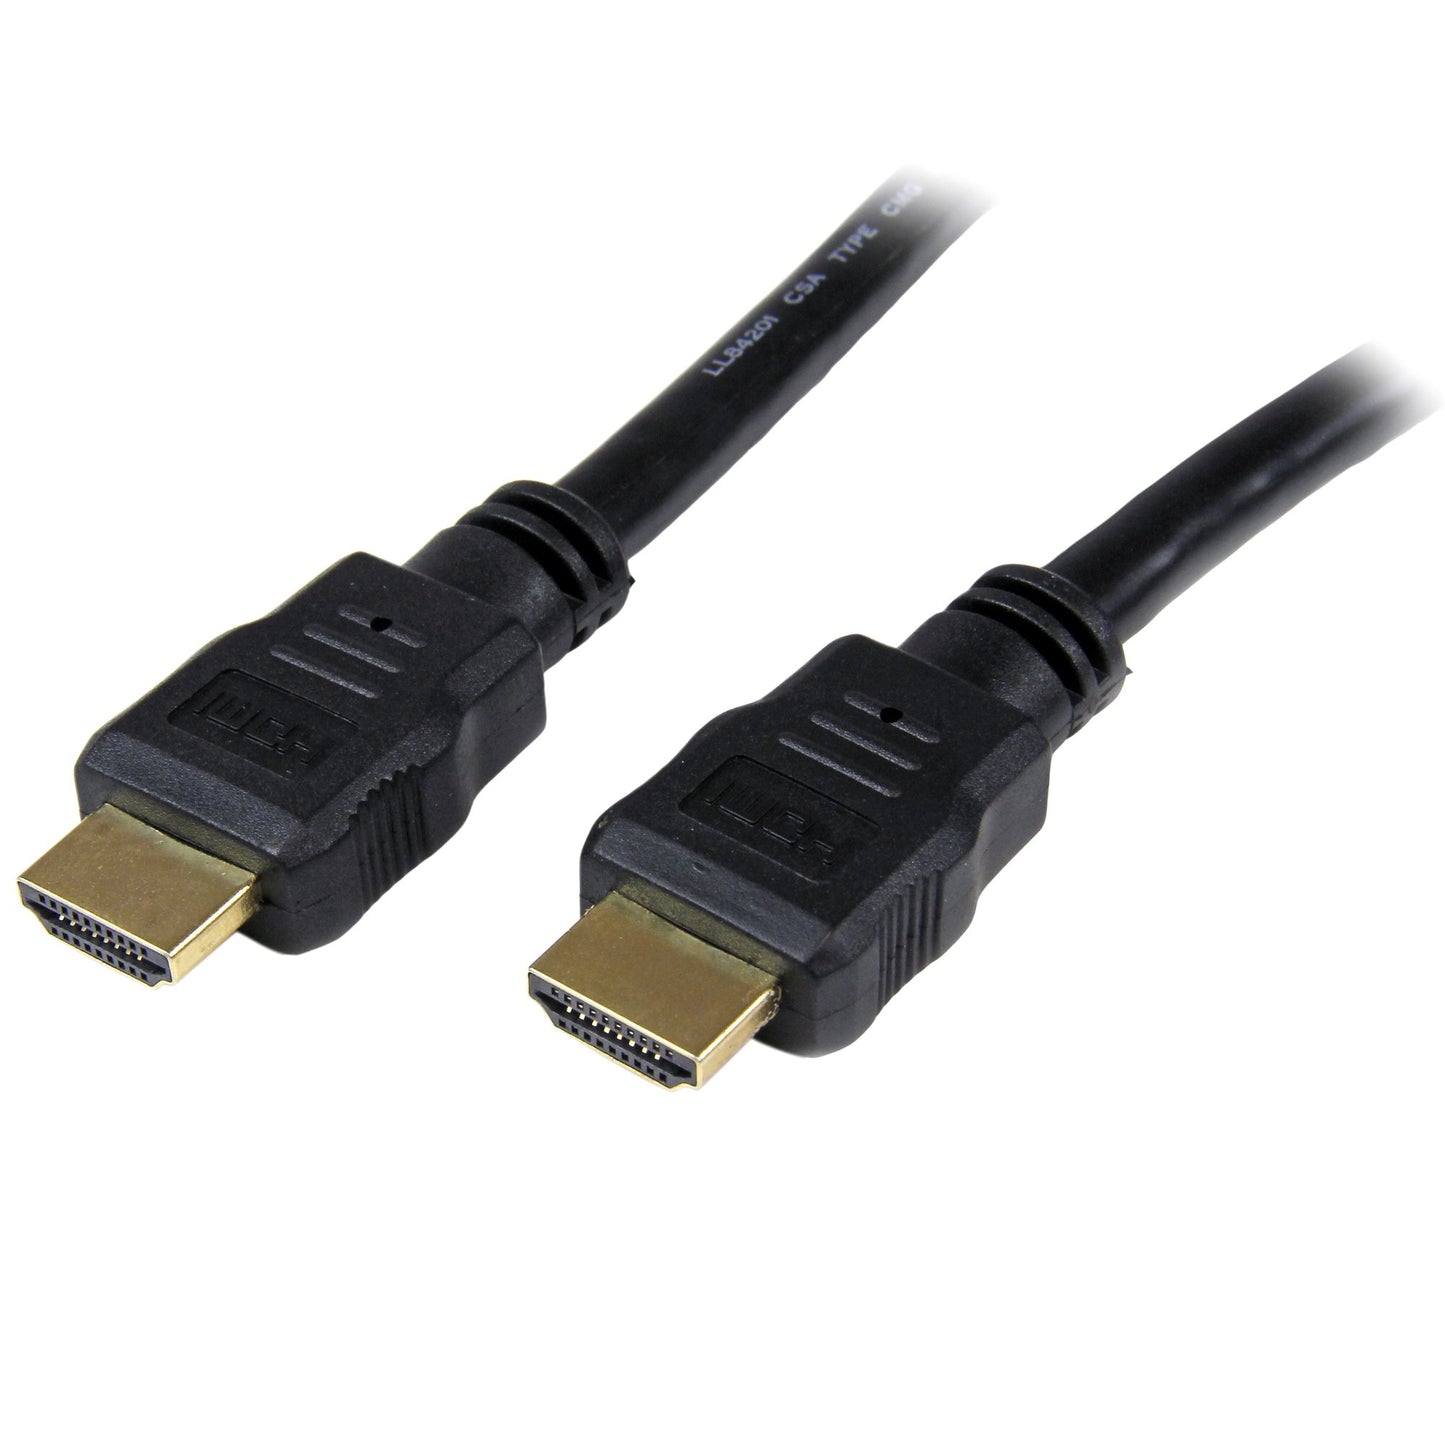 StarTech.com 50cm (1.6ft) HDMI Cable - 4K High Speed HDMI Cable with Ethernet - UHD 4K 30Hz Video - HDMI 1.4 Cable - Ultra HD HDMI Monitors, Projectors, TVs & Displays - Black HDMI Cord - M/M-0